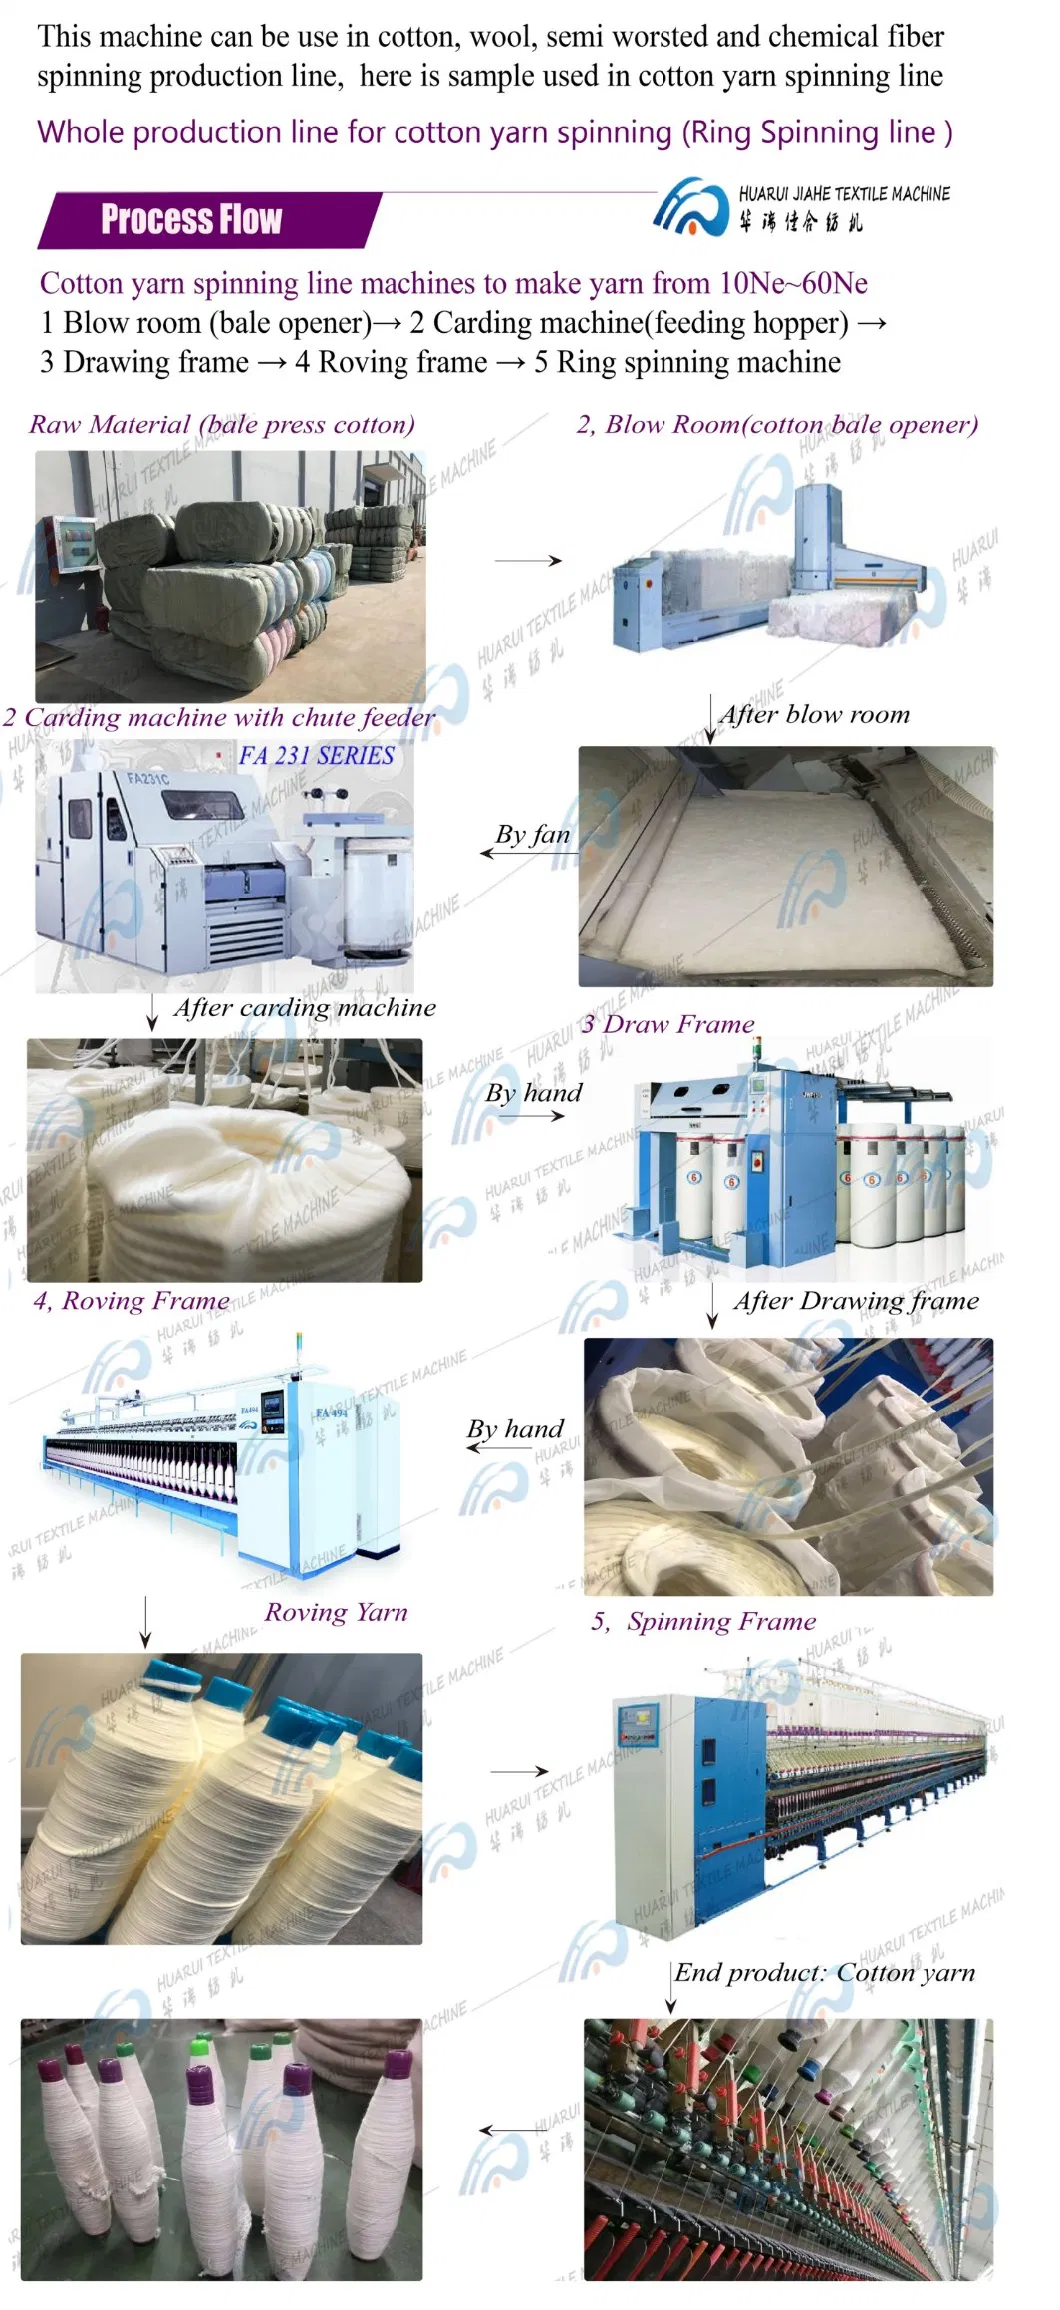 Single Slot Sample in Research for Power Dyeing Pigment Machine Acrylic Resins Good Quality Textile Terylene. Pure Silk, Nylon Sample Dyeing Machine